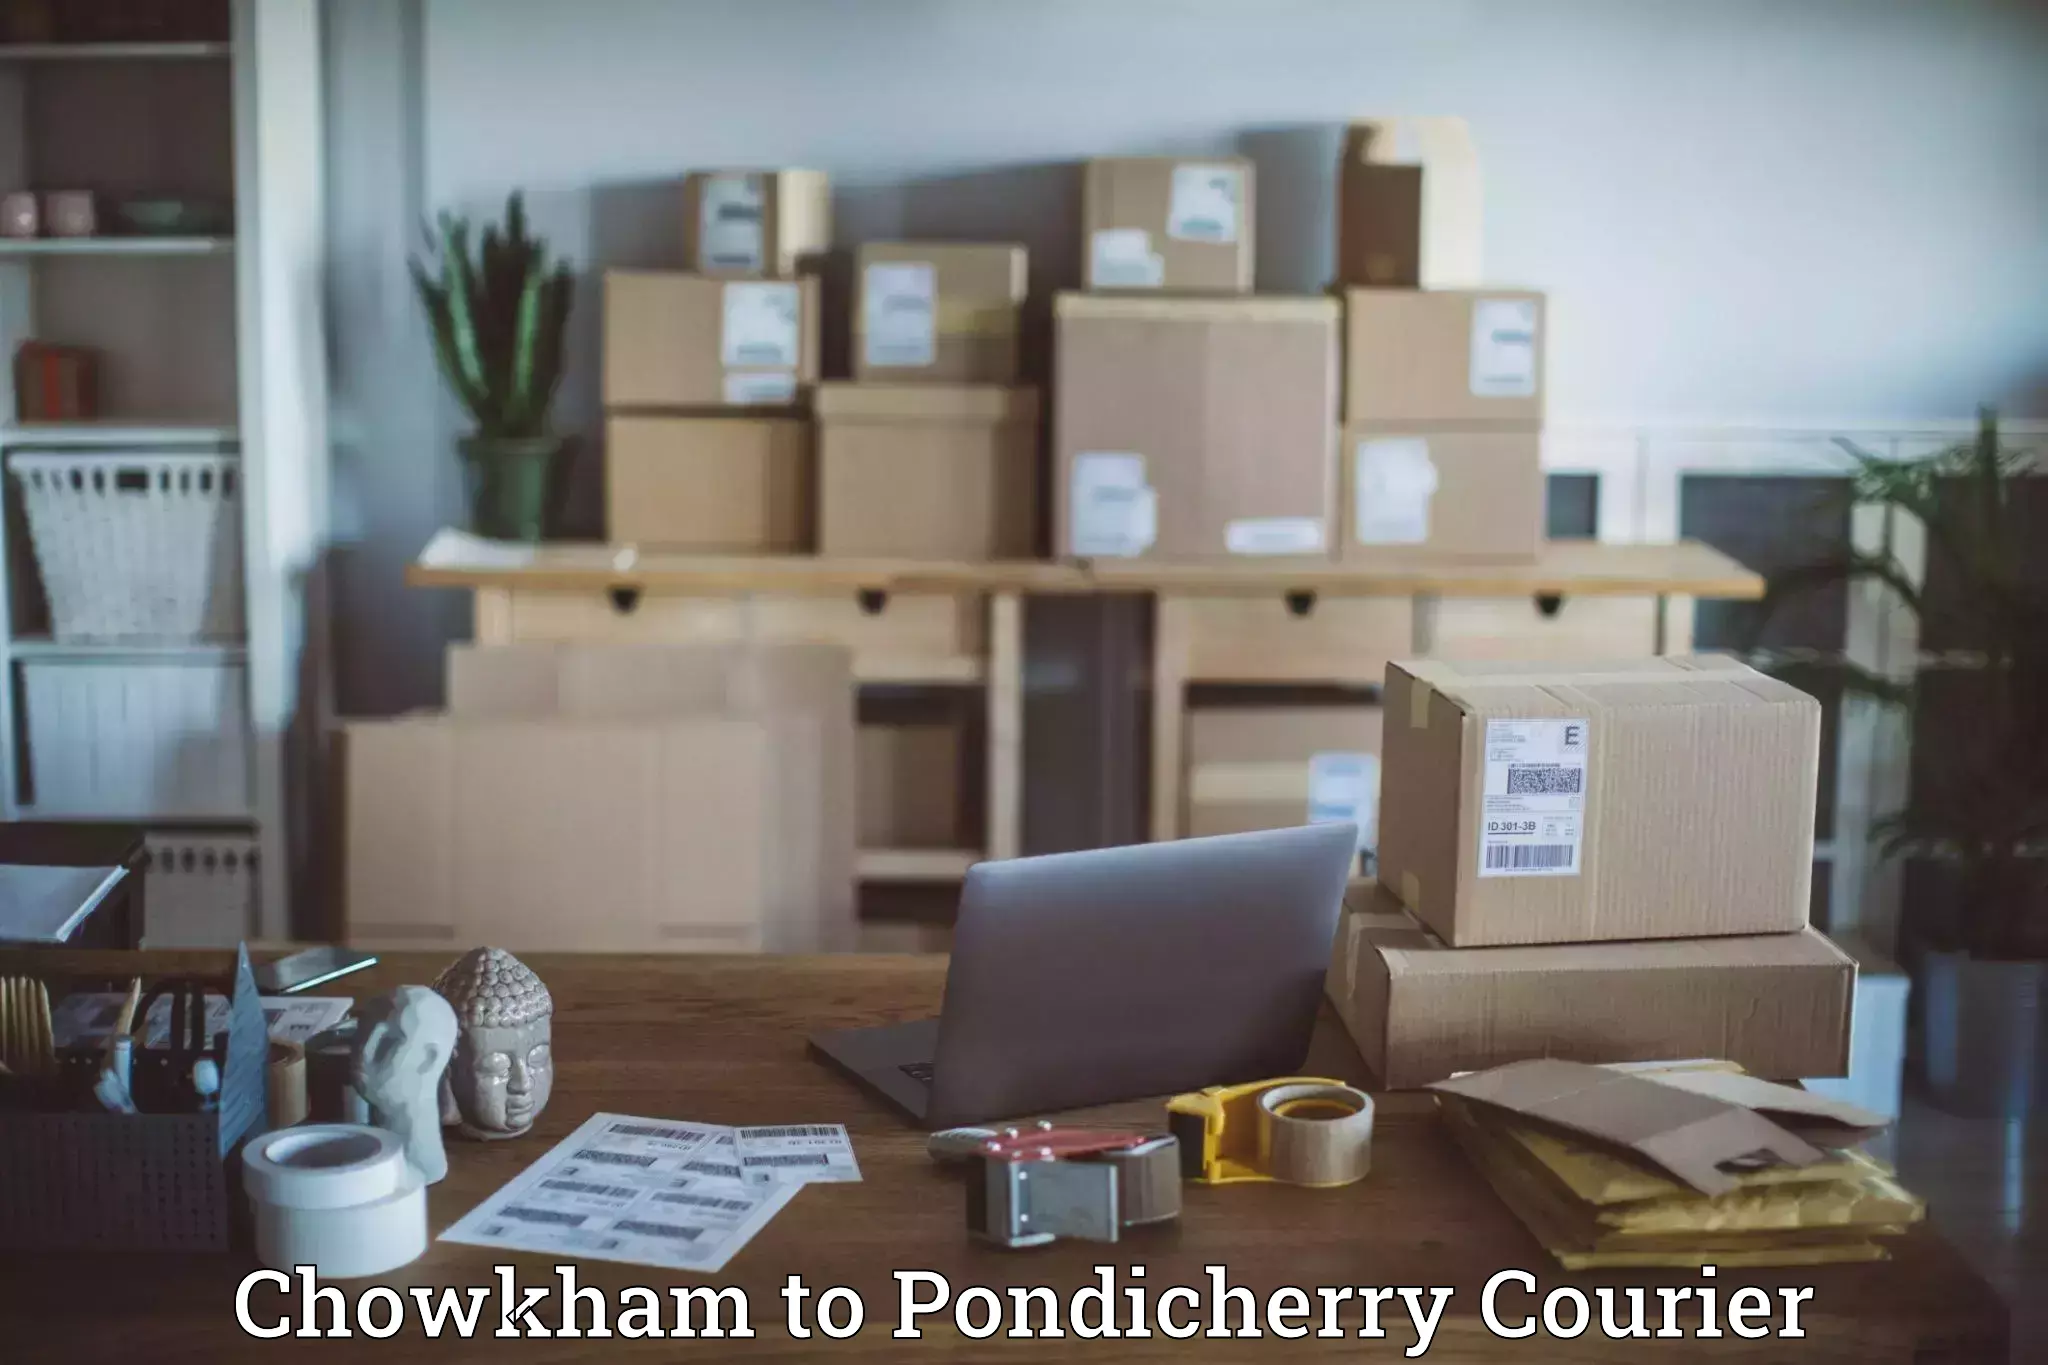 Package delivery network Chowkham to Pondicherry